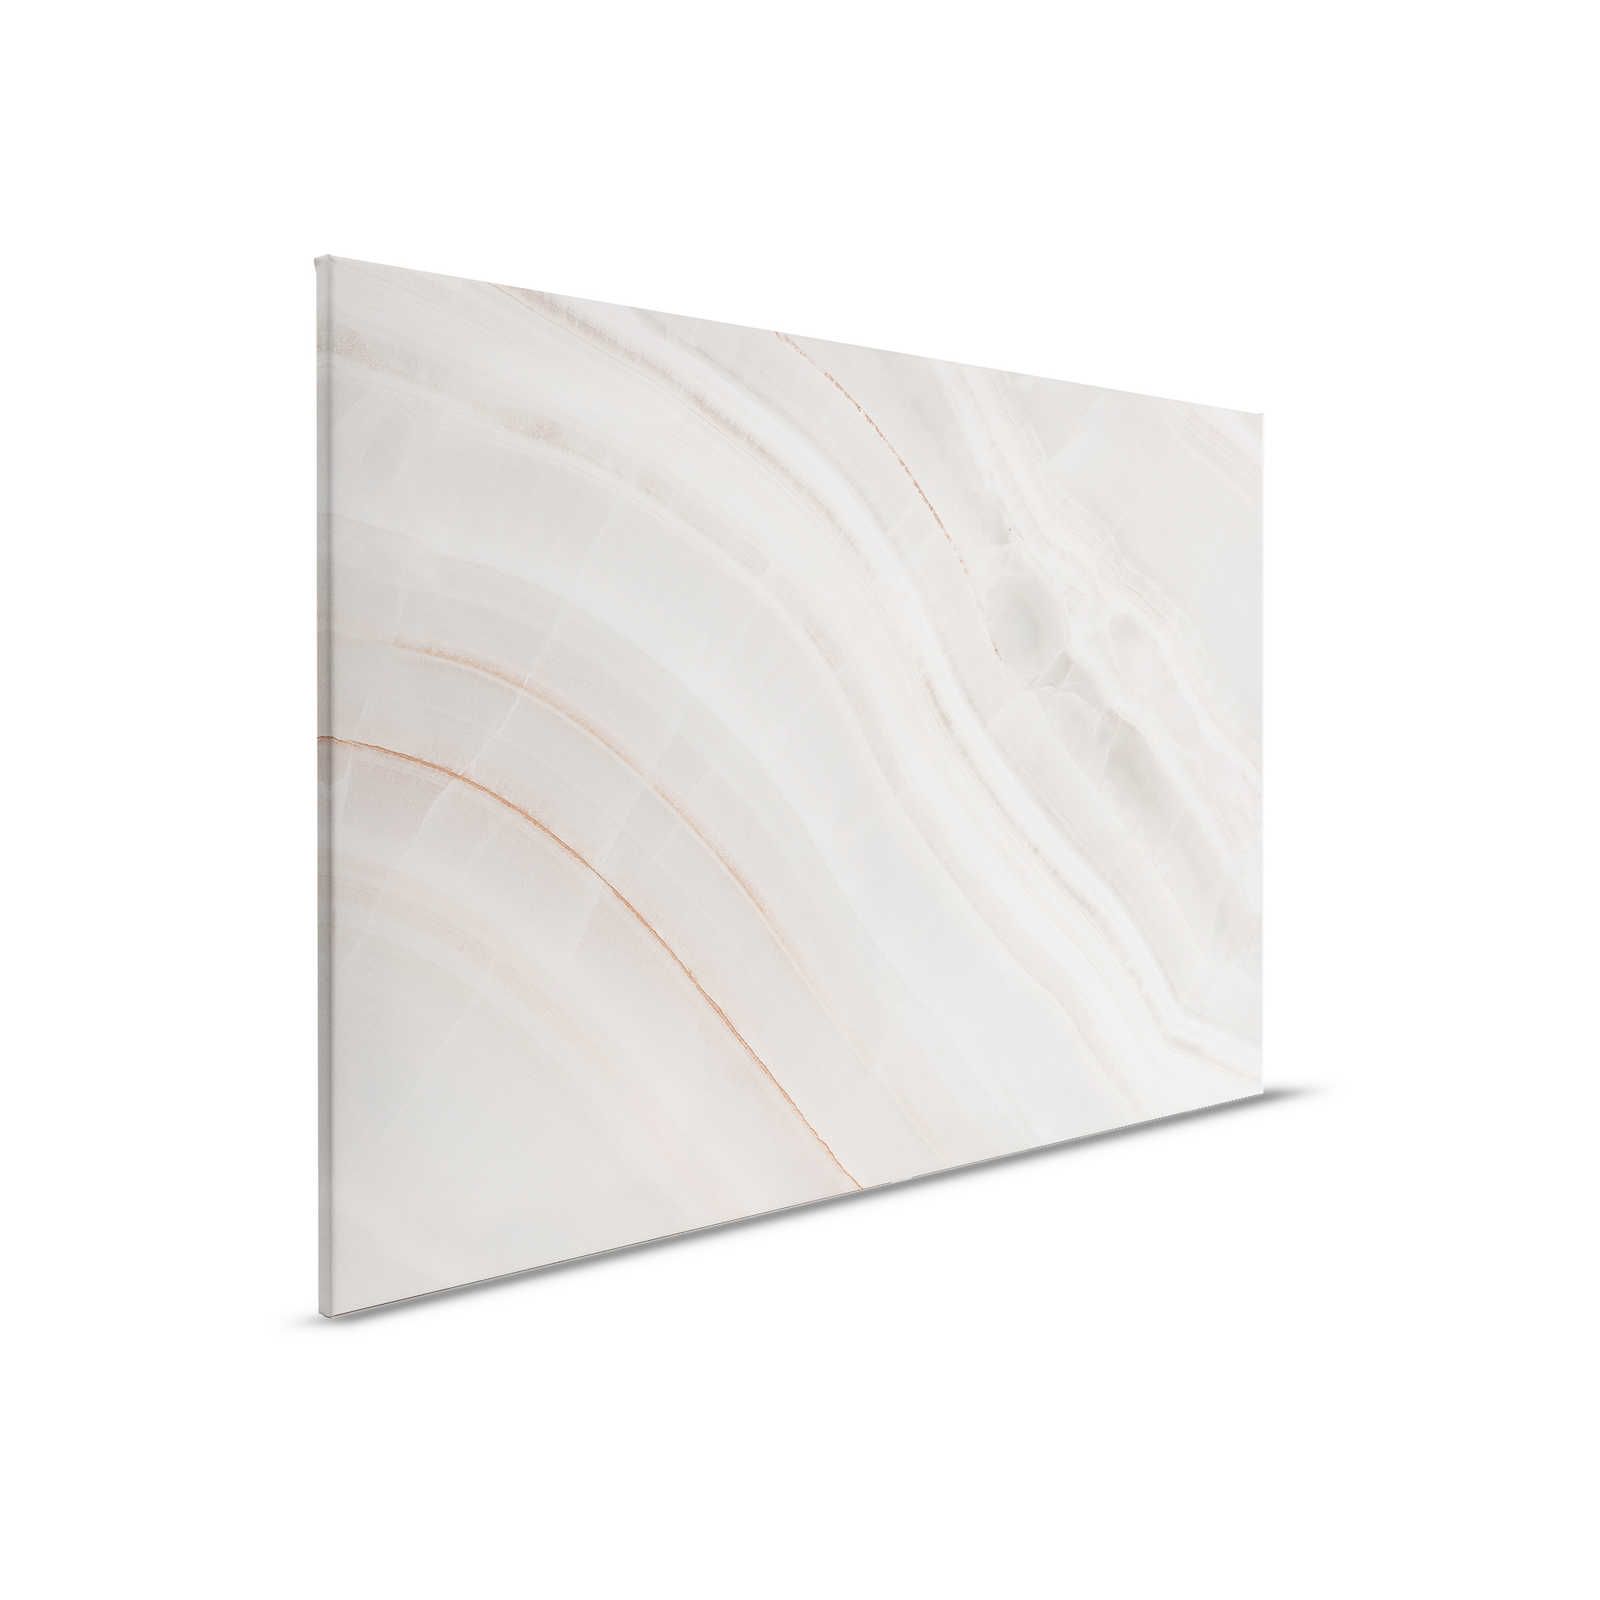         Marble Canvas Painting with Marbled Stone Panel - 0.90 m x 0.60 m
    